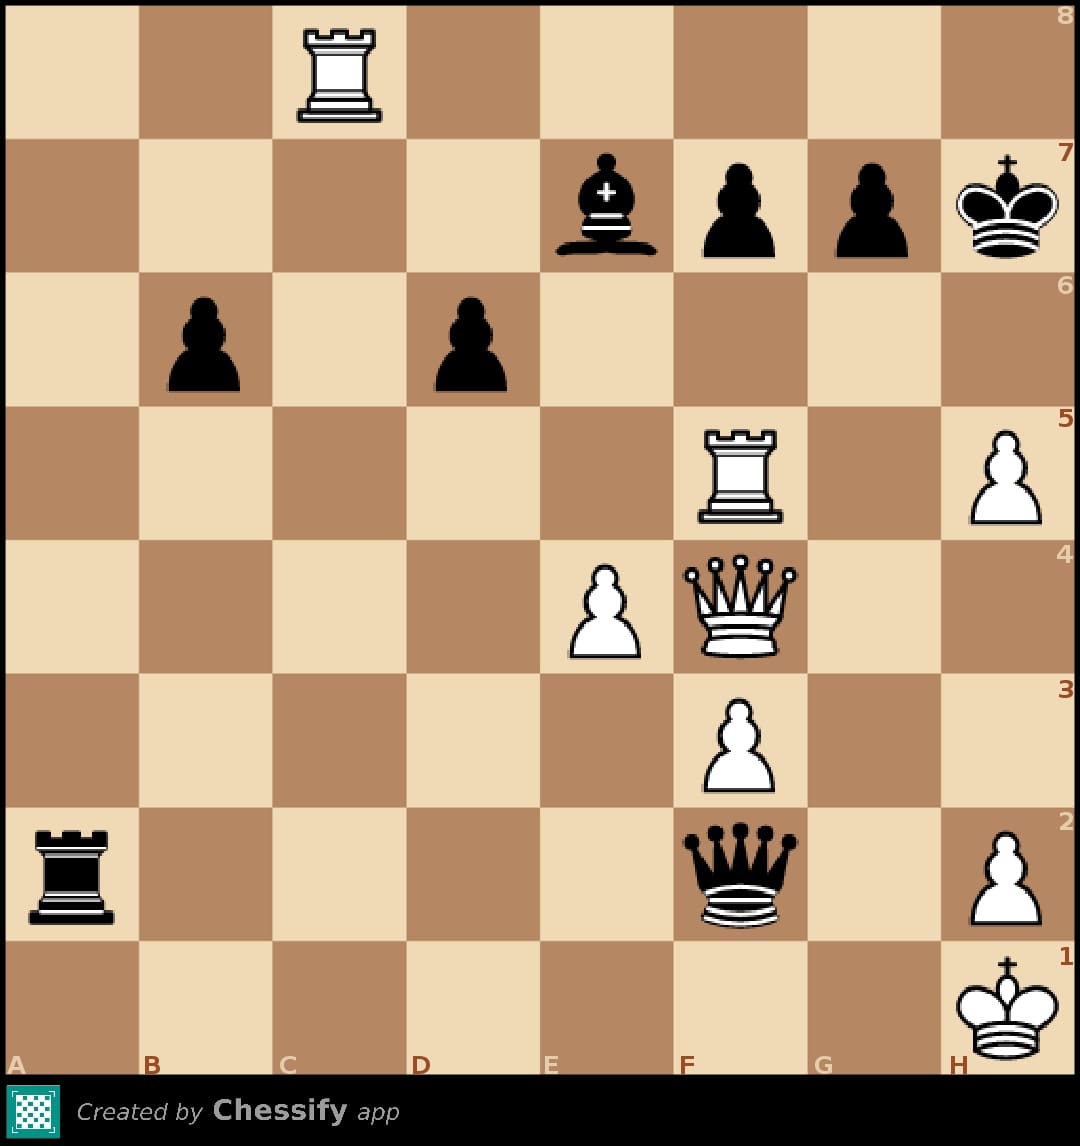 Lichess engine analysis stops loading after ~8 moves? : r/chess